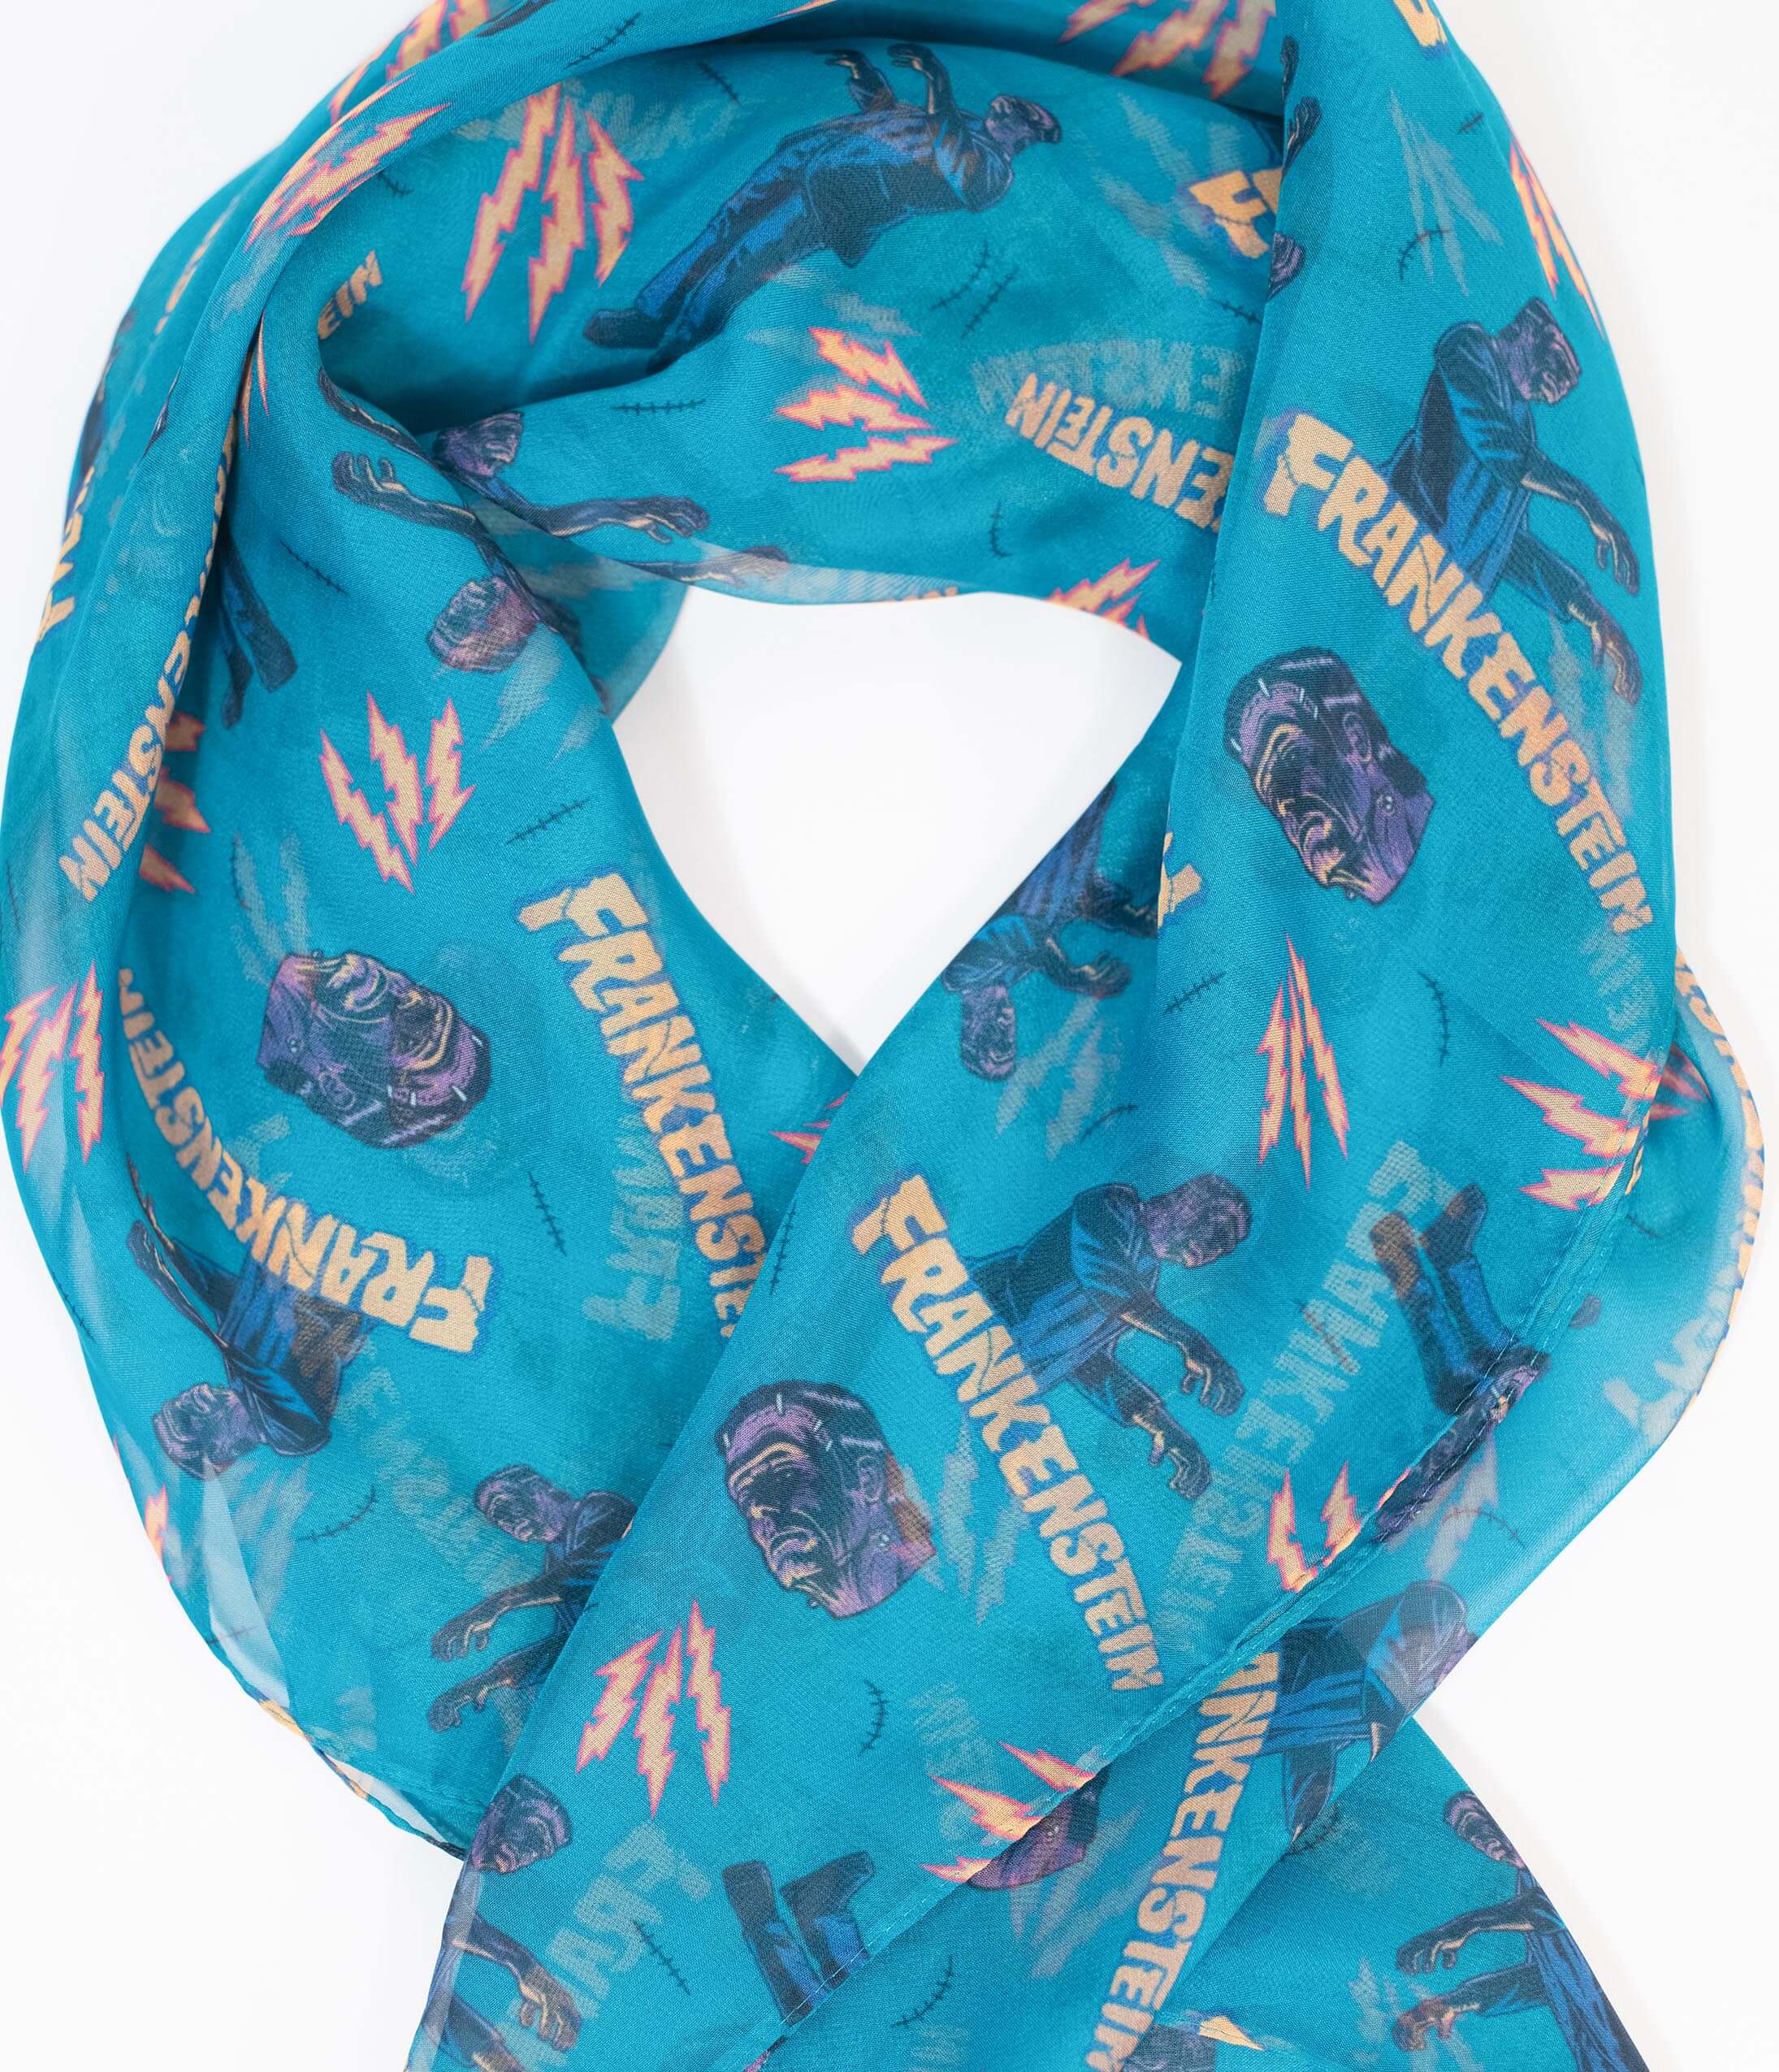 This is a Universal Monsters Frankenstein chiffon hair scarf that is teal and has yellow lightening bolts and heads on it.